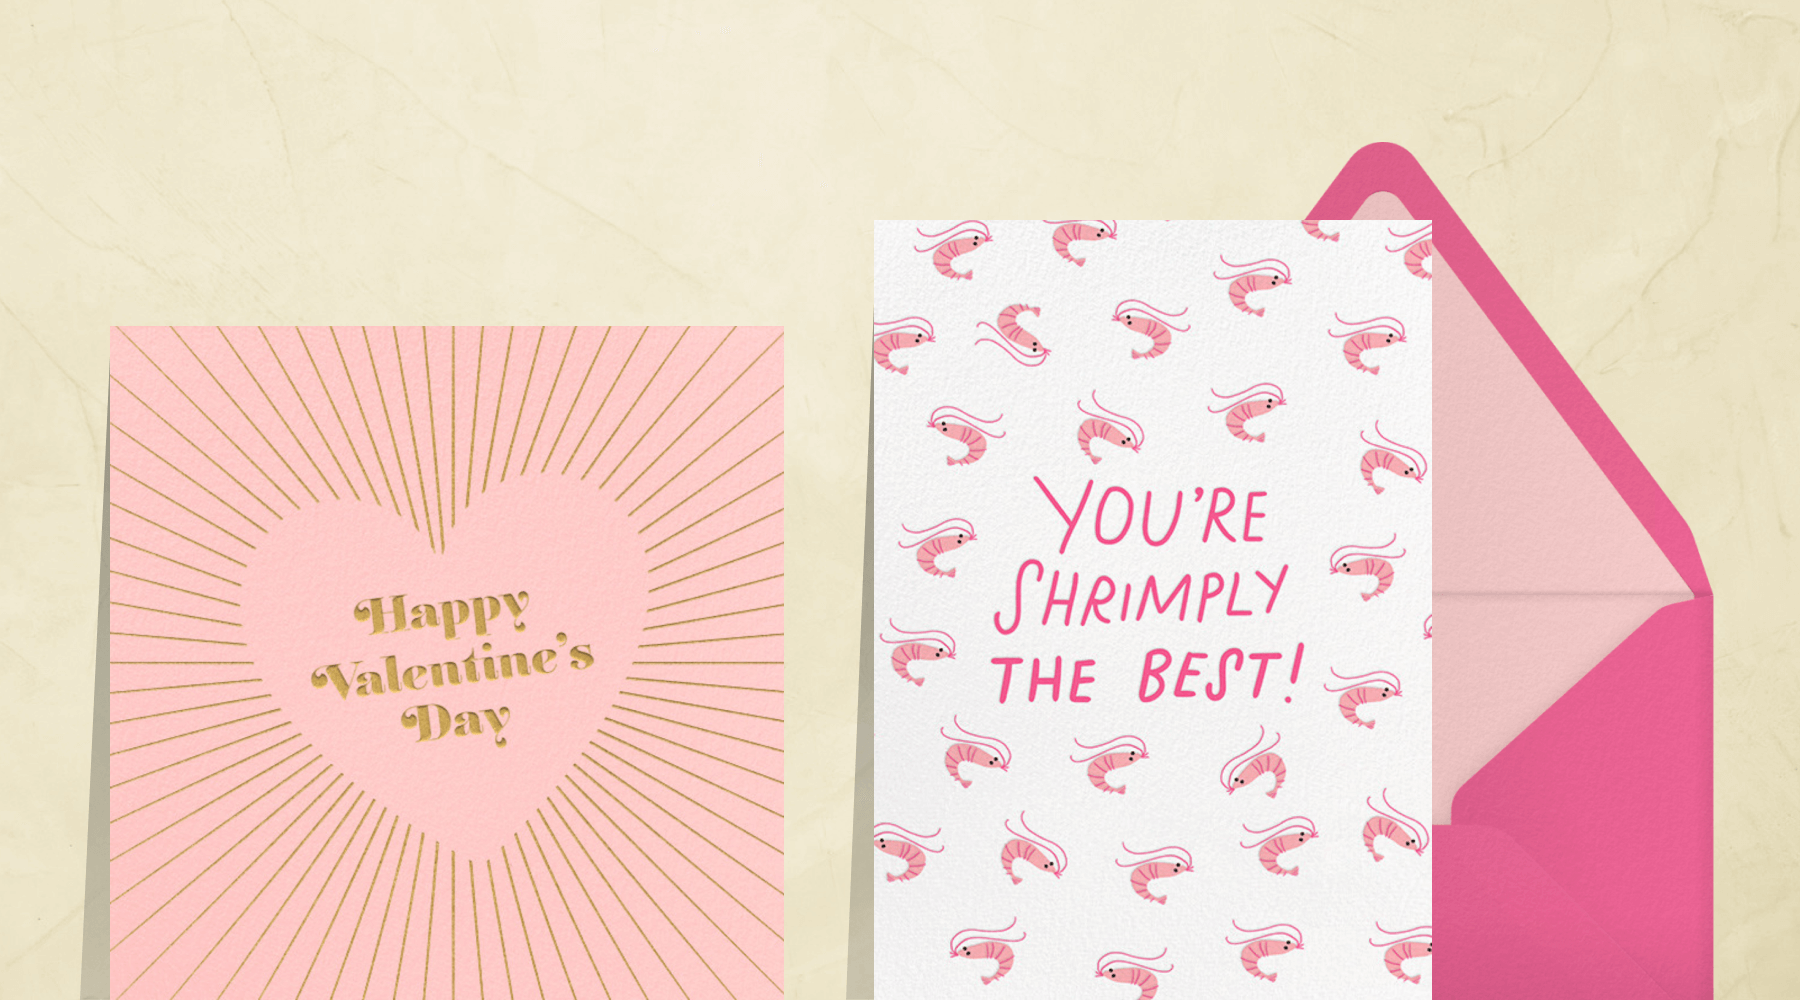 Left: A pink square VDay card with the words “Happy Valentine’s Day” in a heart; Right: A VDay card with a shrimp pattern that reads “You’re shrimply the best!”